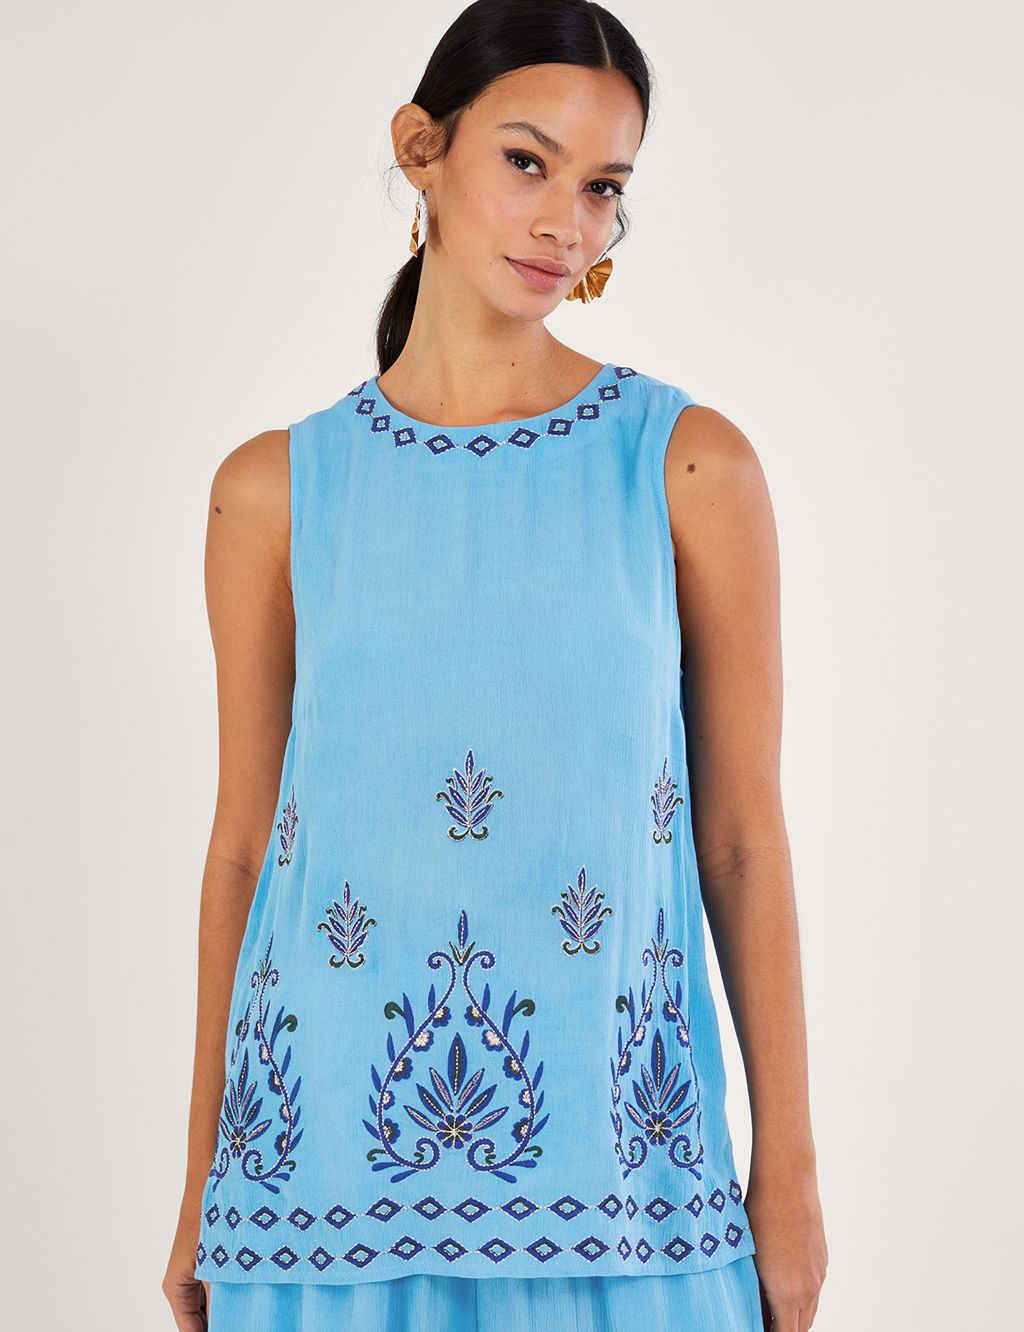 Embroidered Round Neck Vest Top image 1